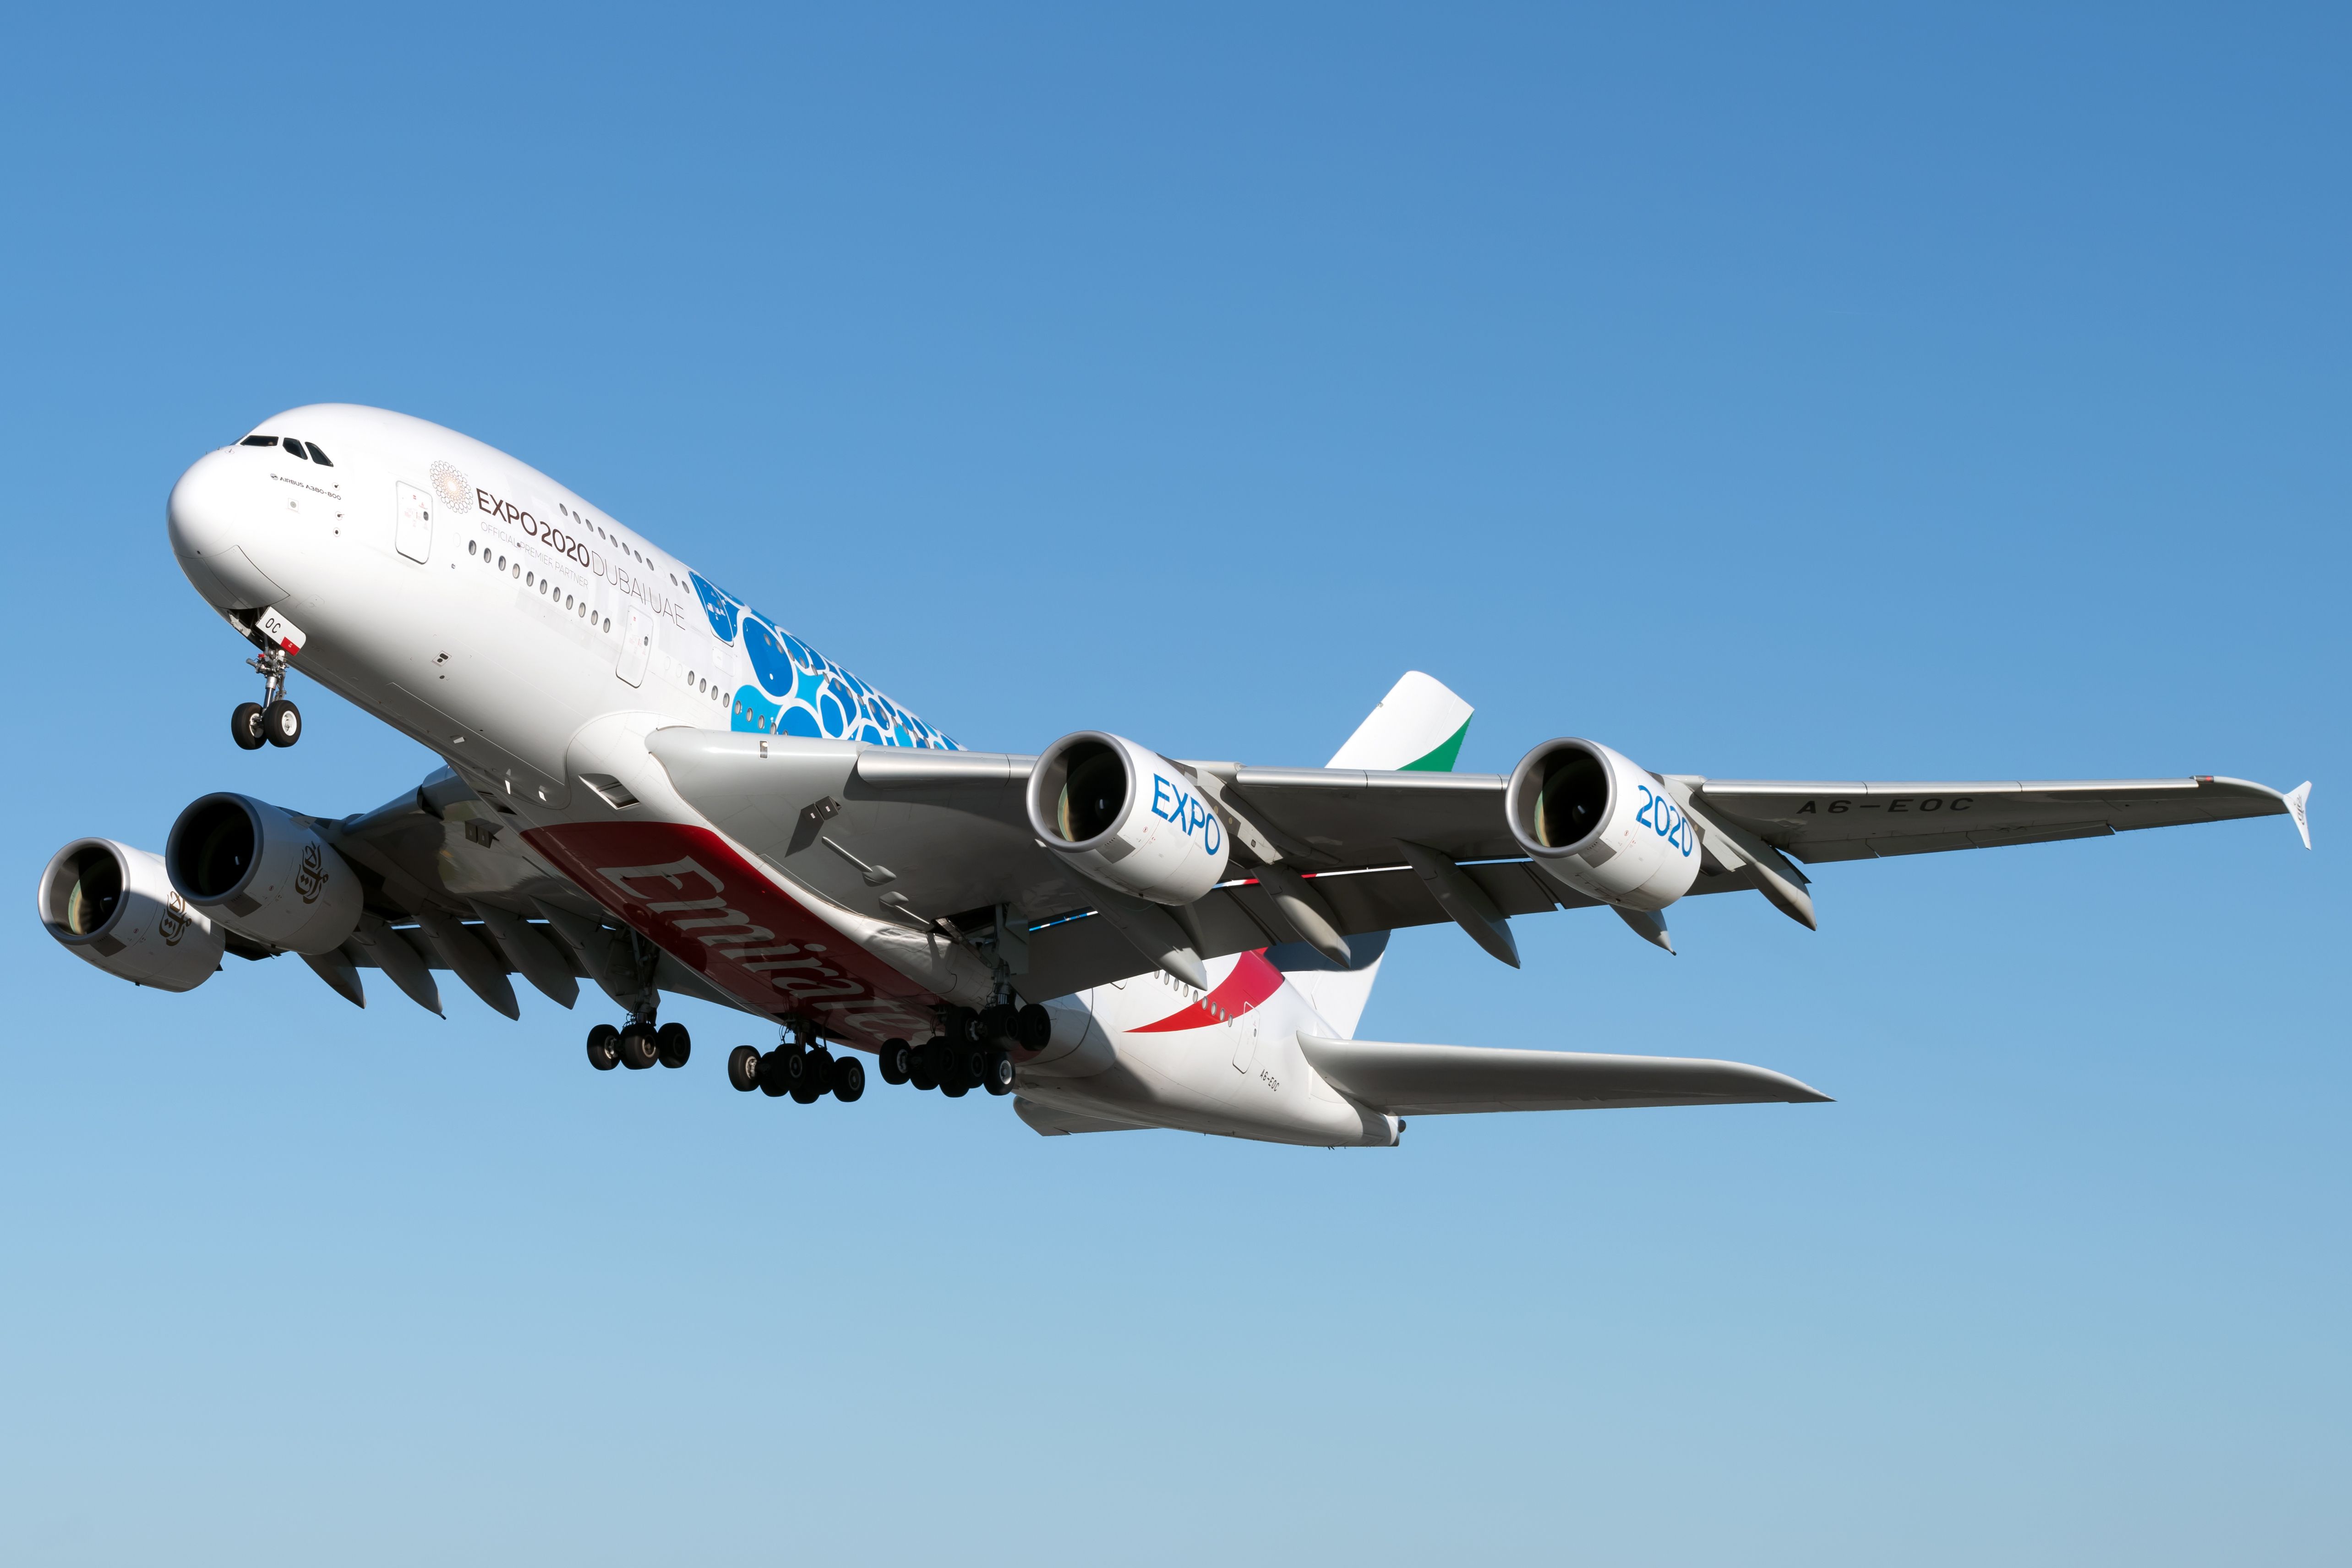 An Emirates Airbus A380 in Dubai Expo 2020 Mobility Livery flying in the sky.